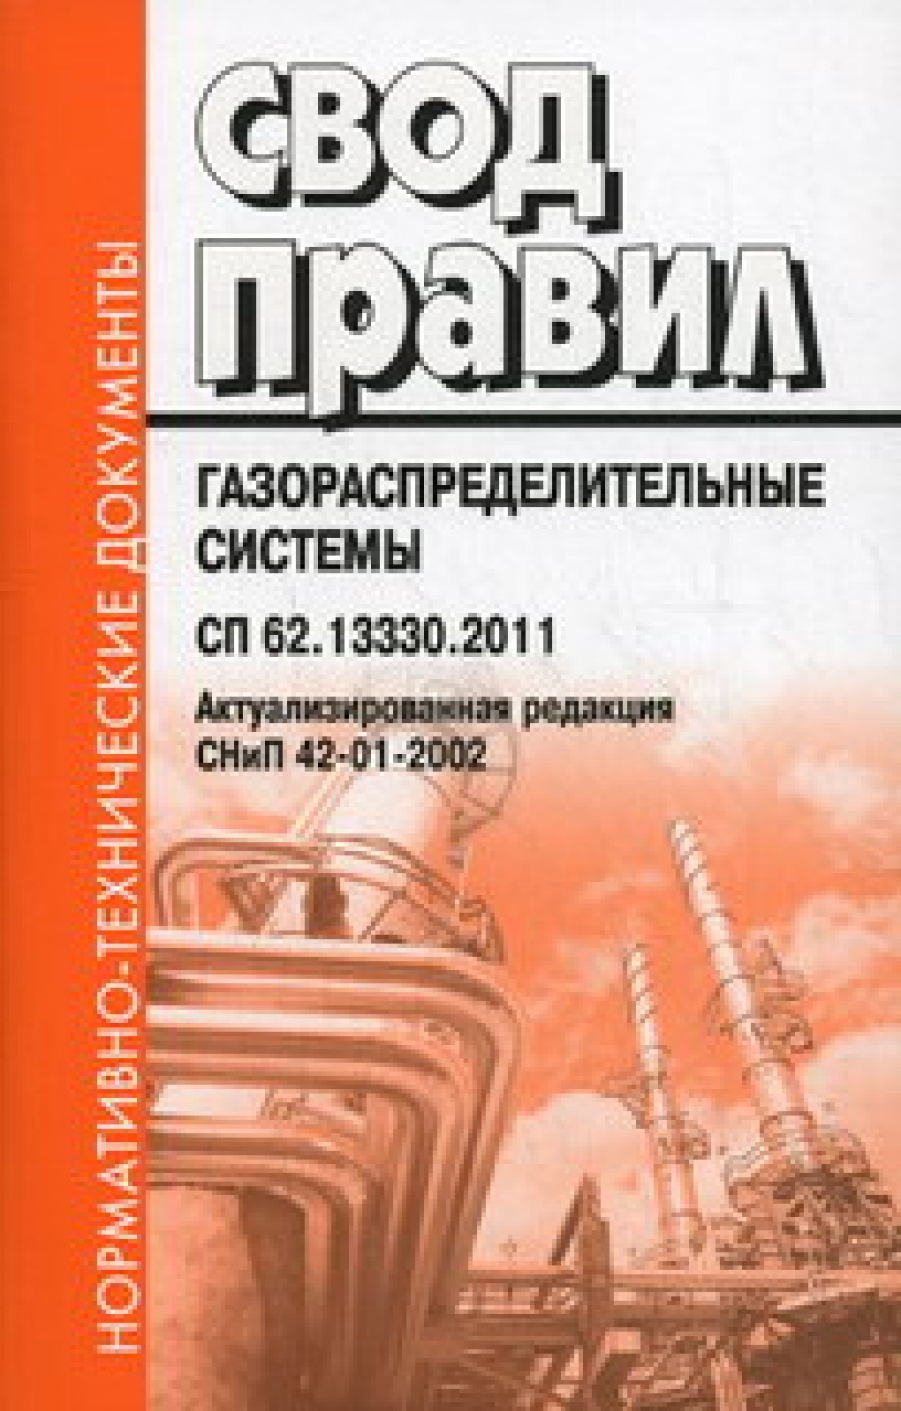  .  .  .  42-01-2002. Gas distribution systems.  62.13330.2011 